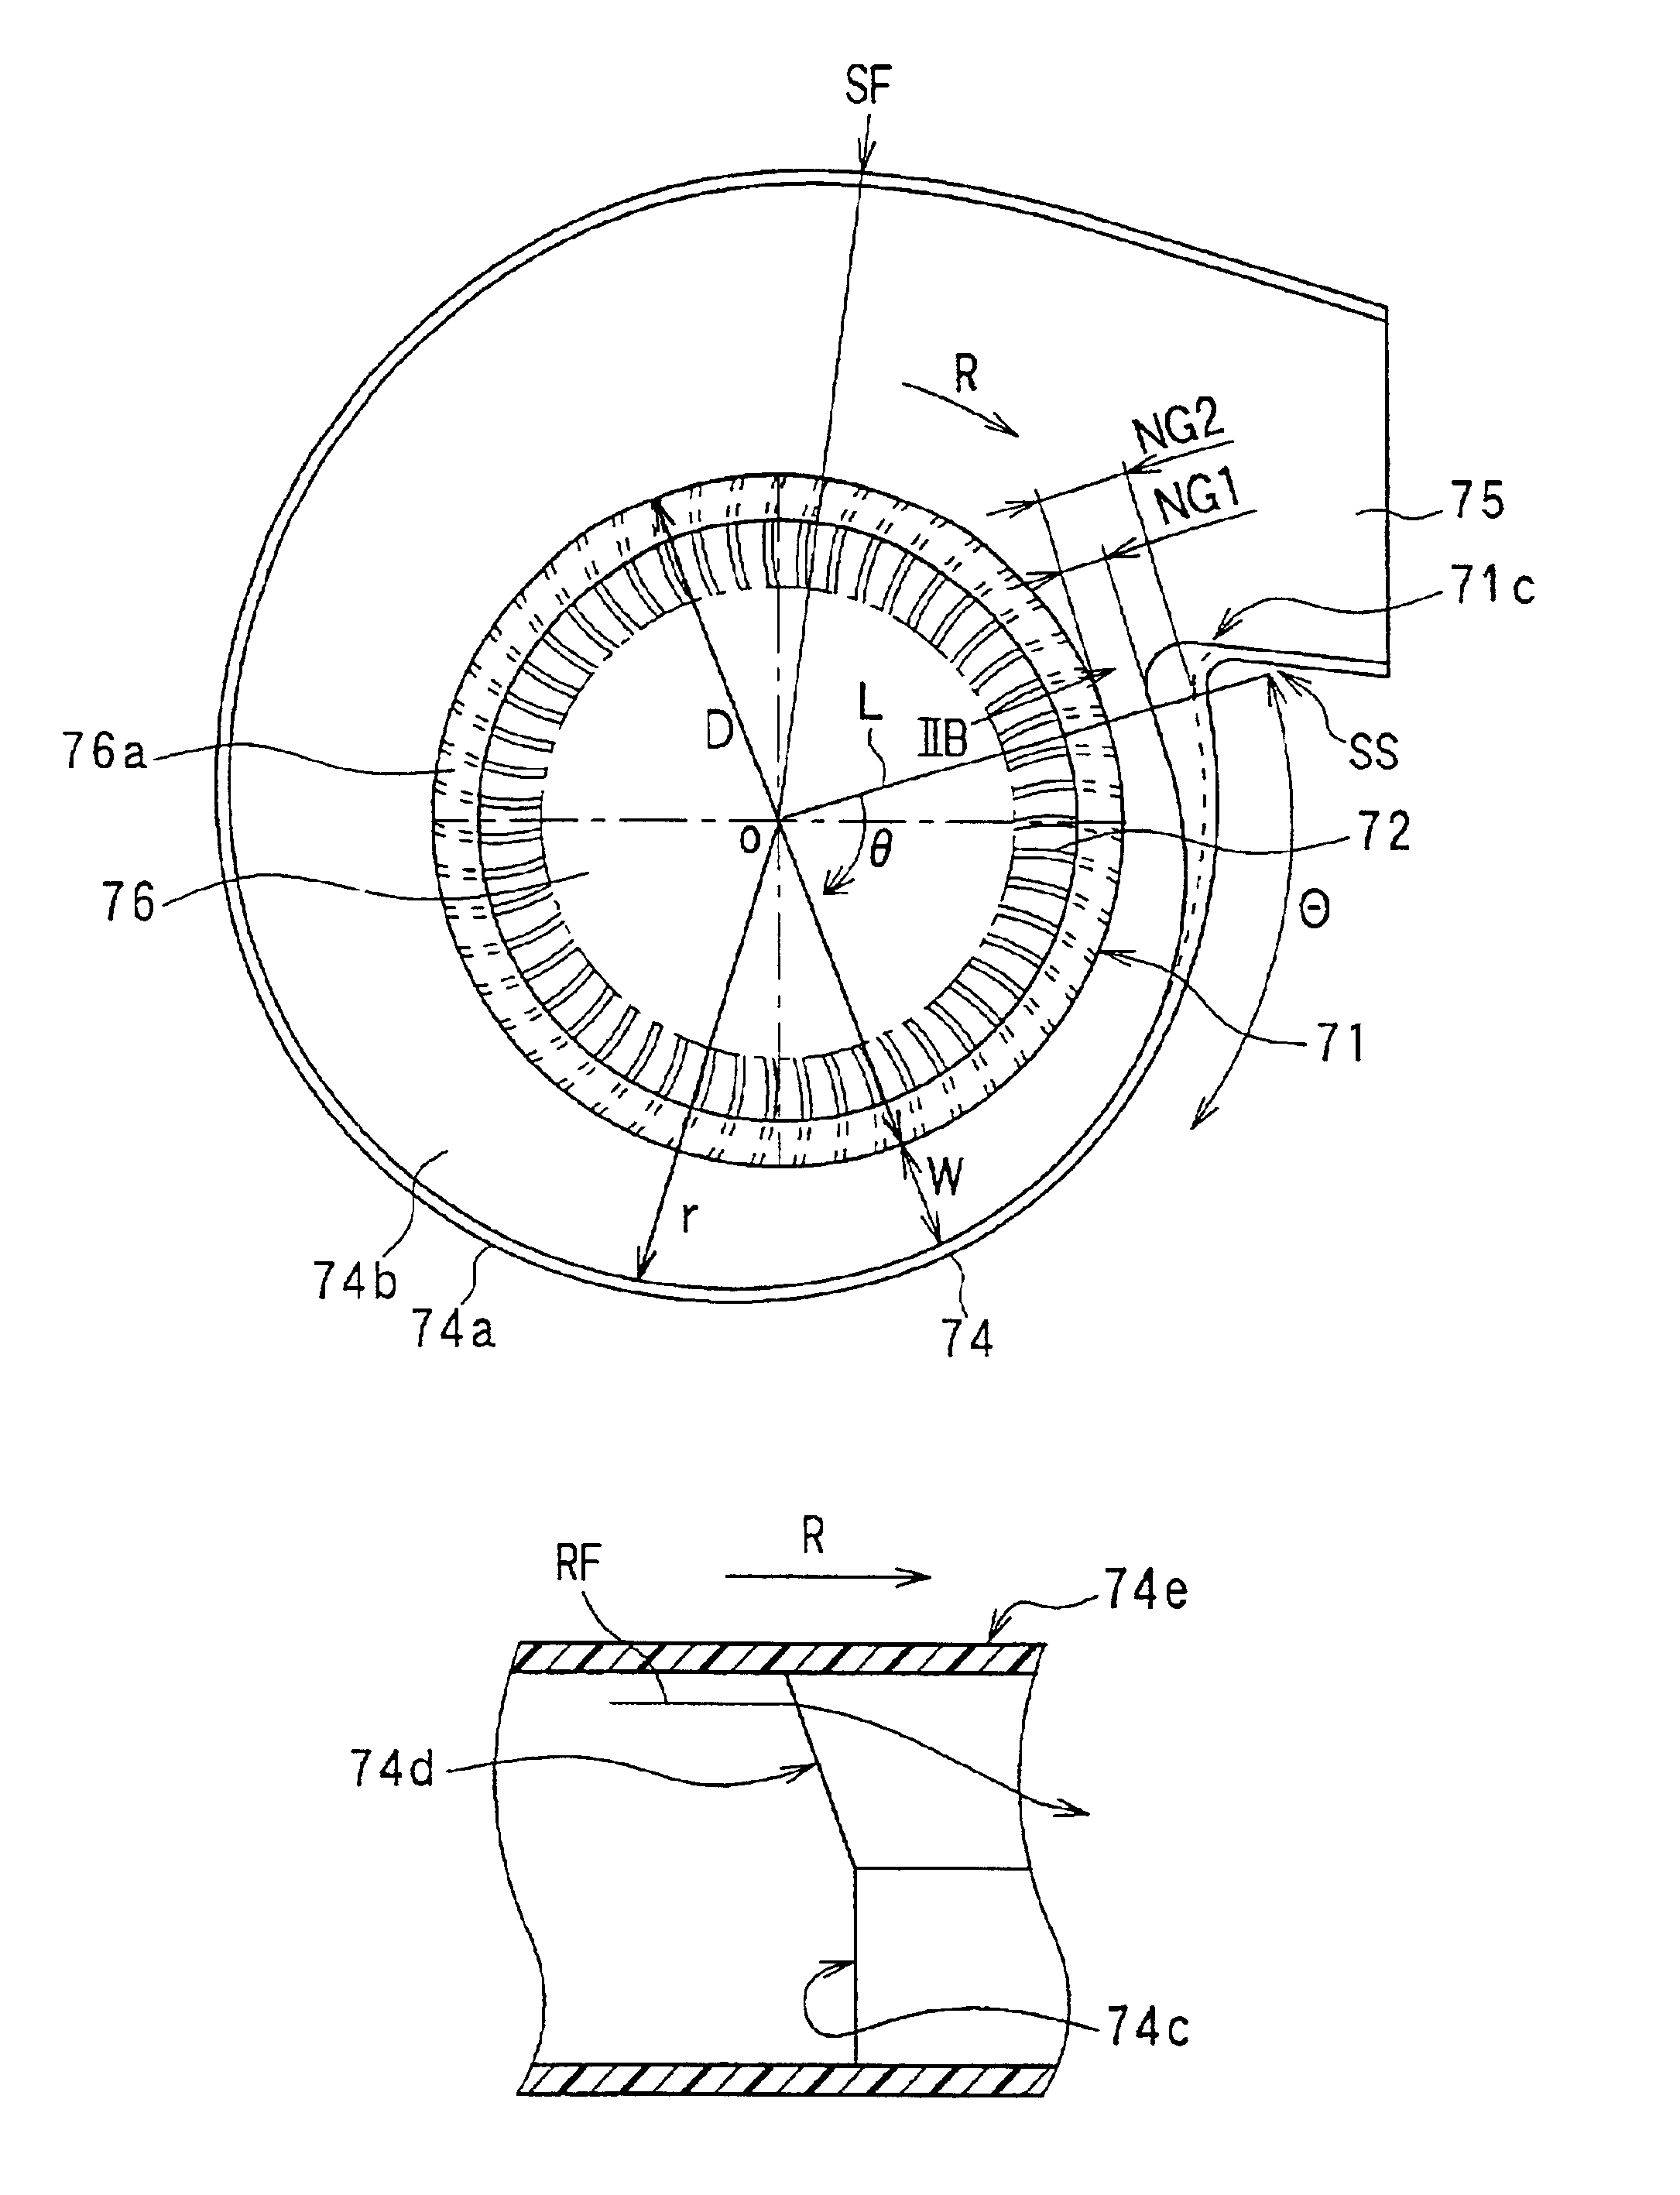 Centrifugal blower having noise-reduction structure